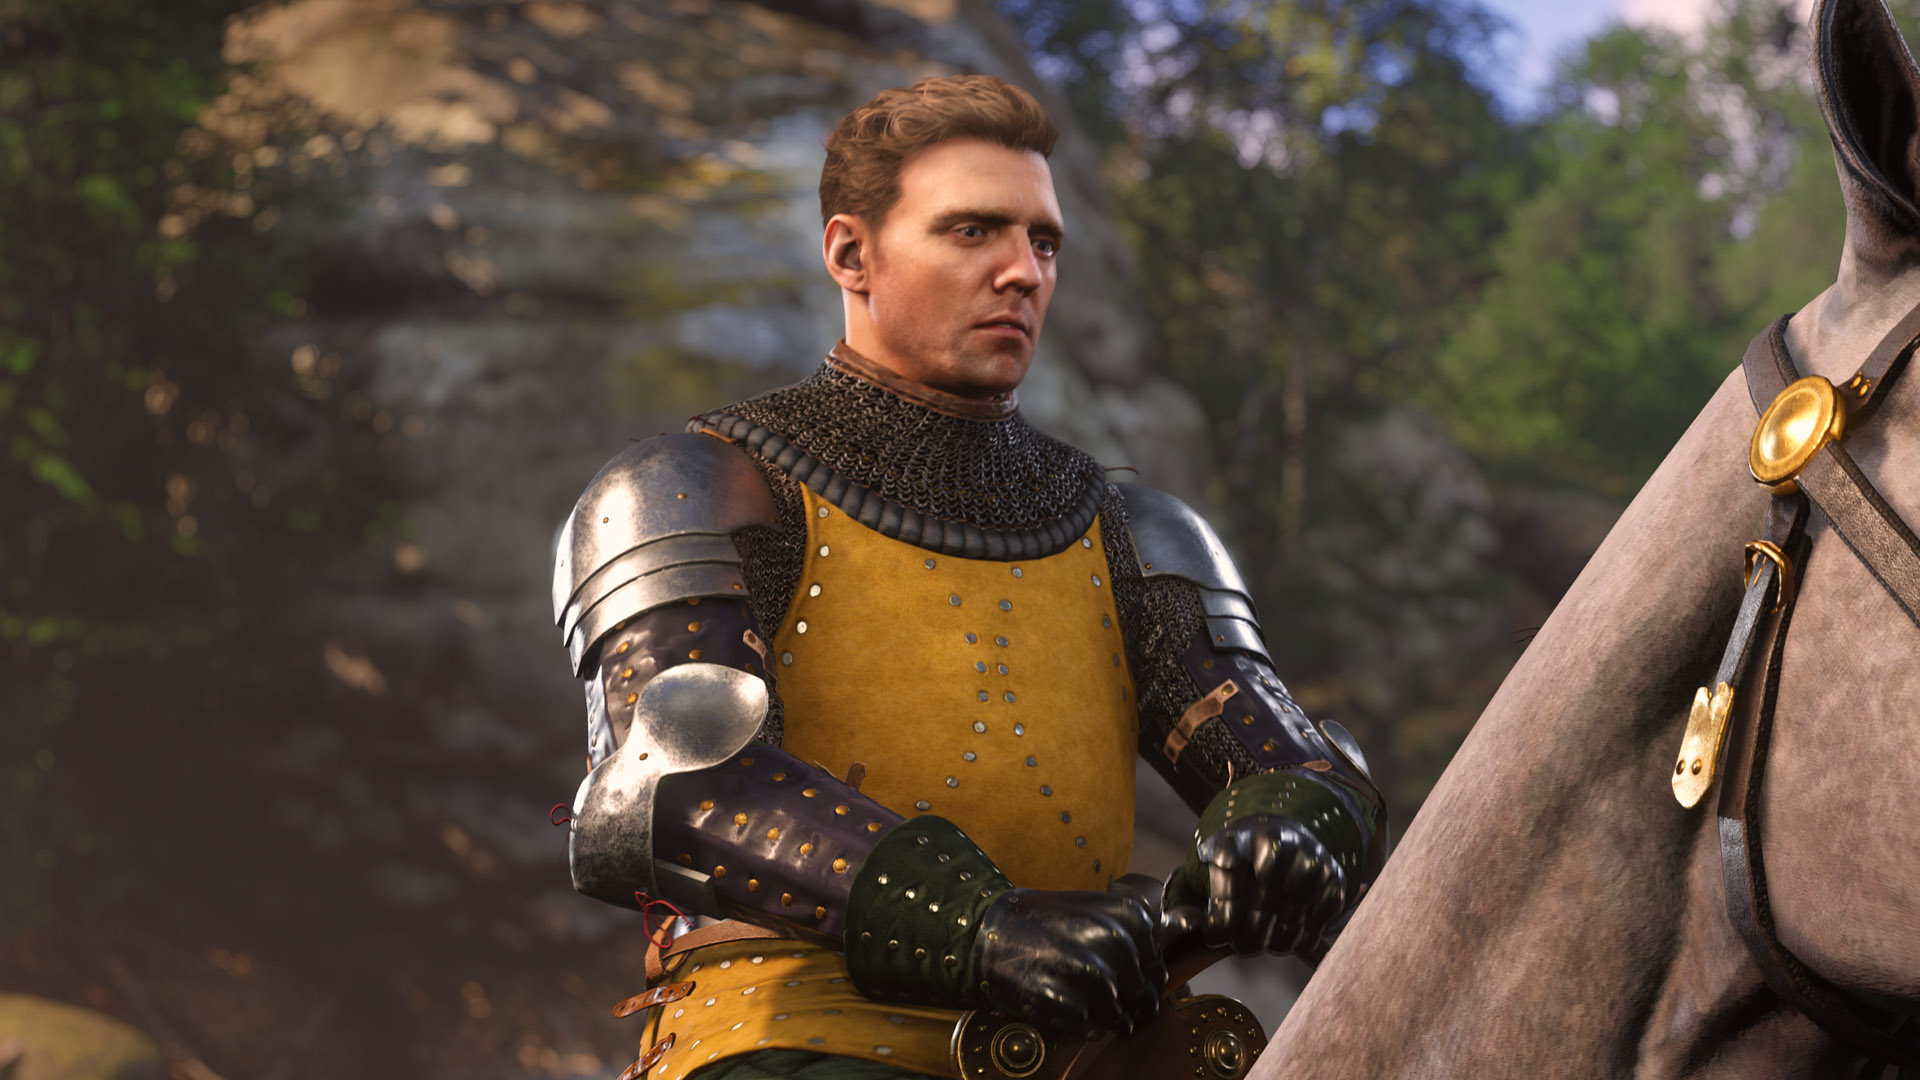 Kingdom Come Deliverance 2 announced with best boy Henry back for more